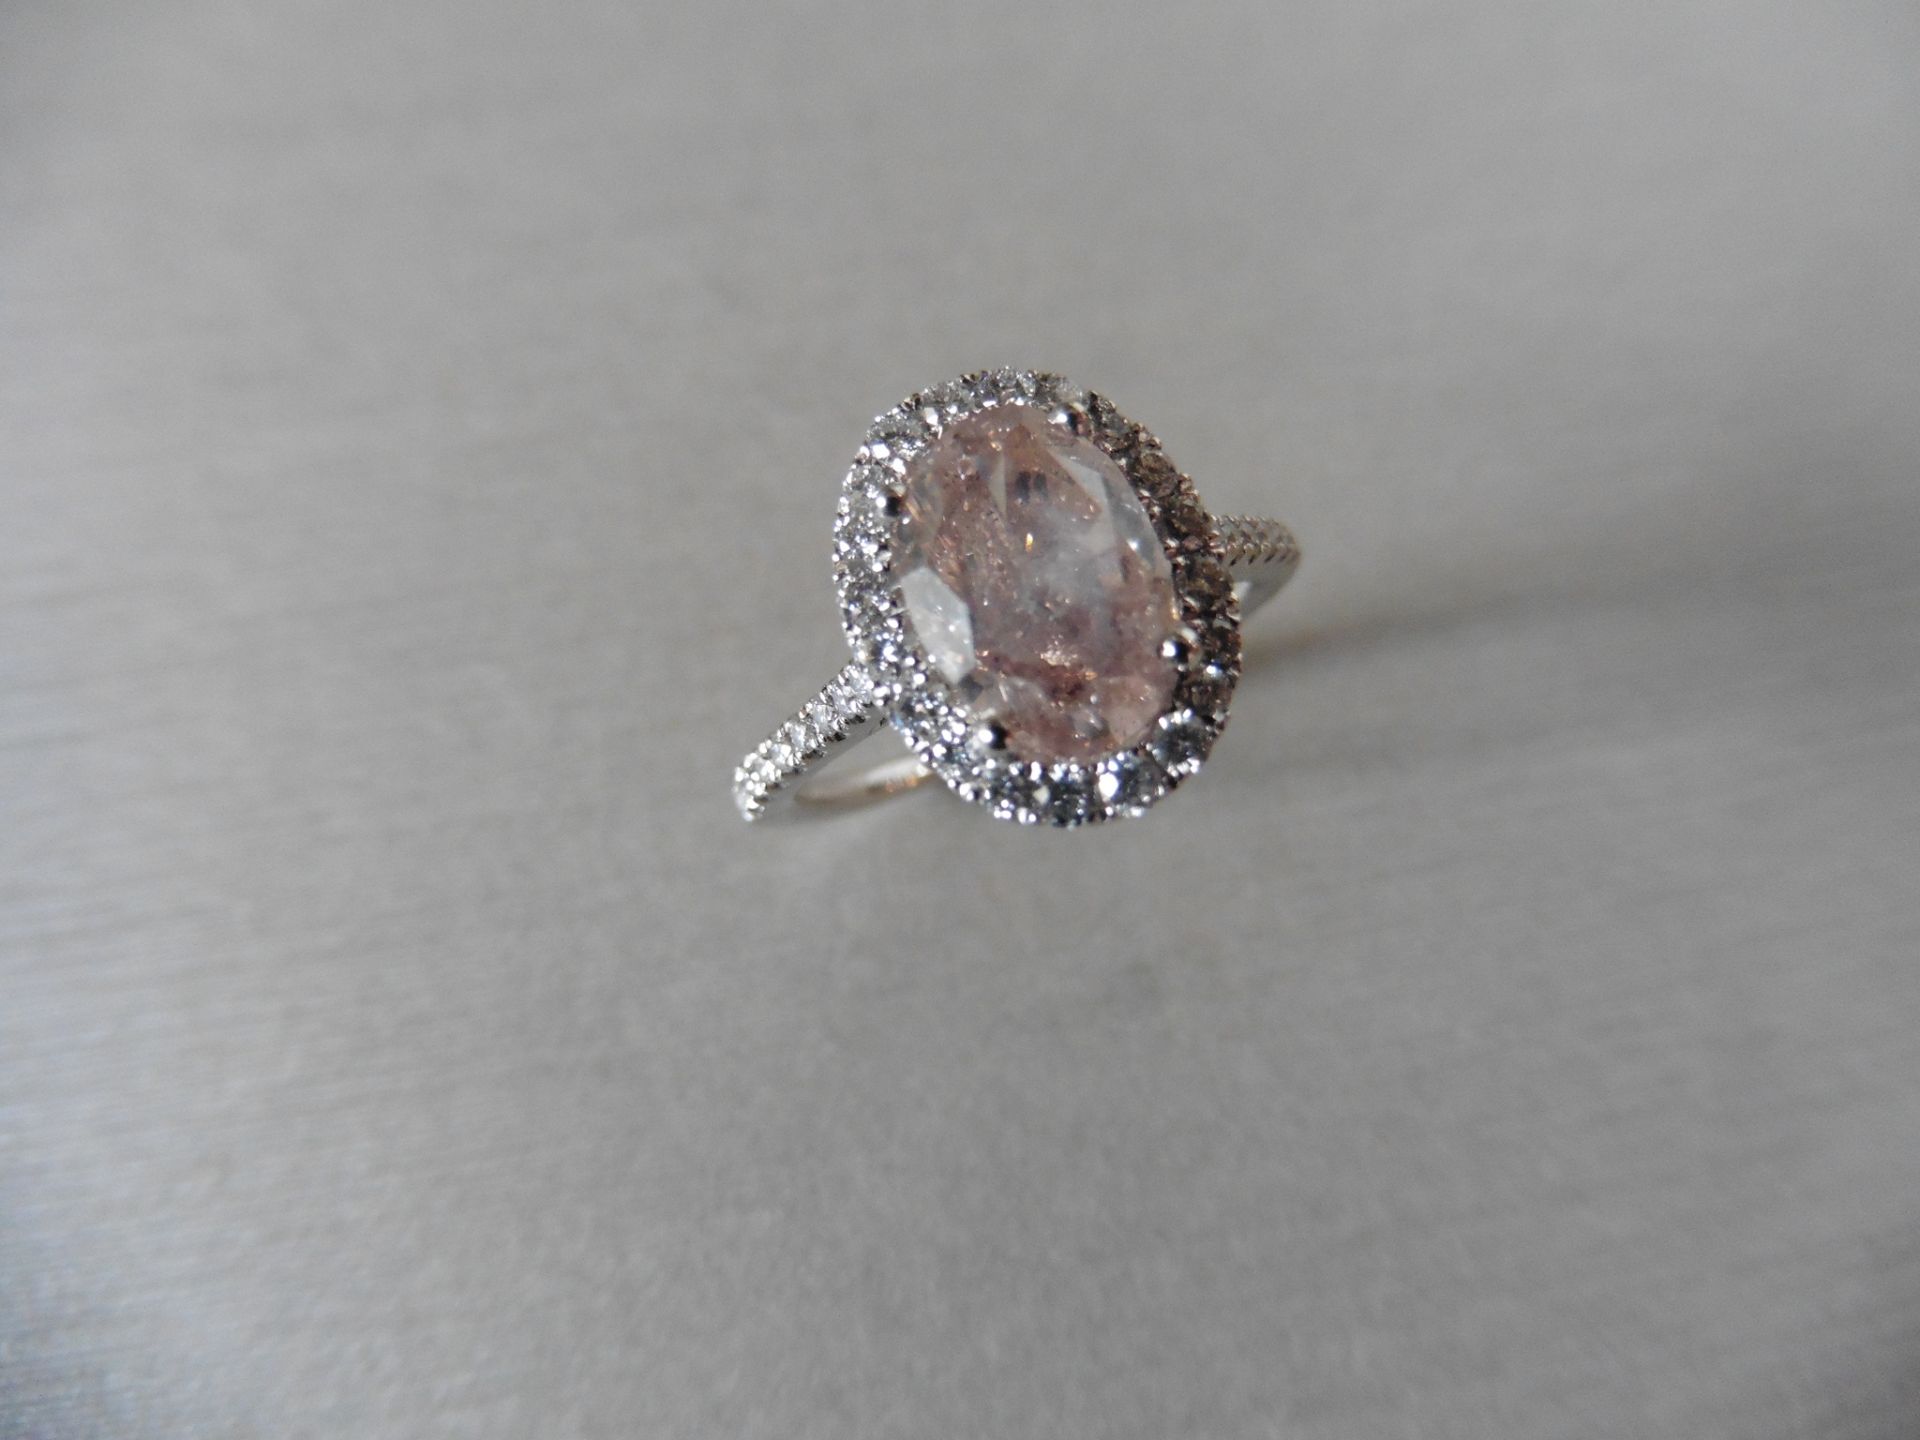 2.35ct diamond set ring with a 2ct pink/ brown oval shaped diamond. This is surrounded with a halo